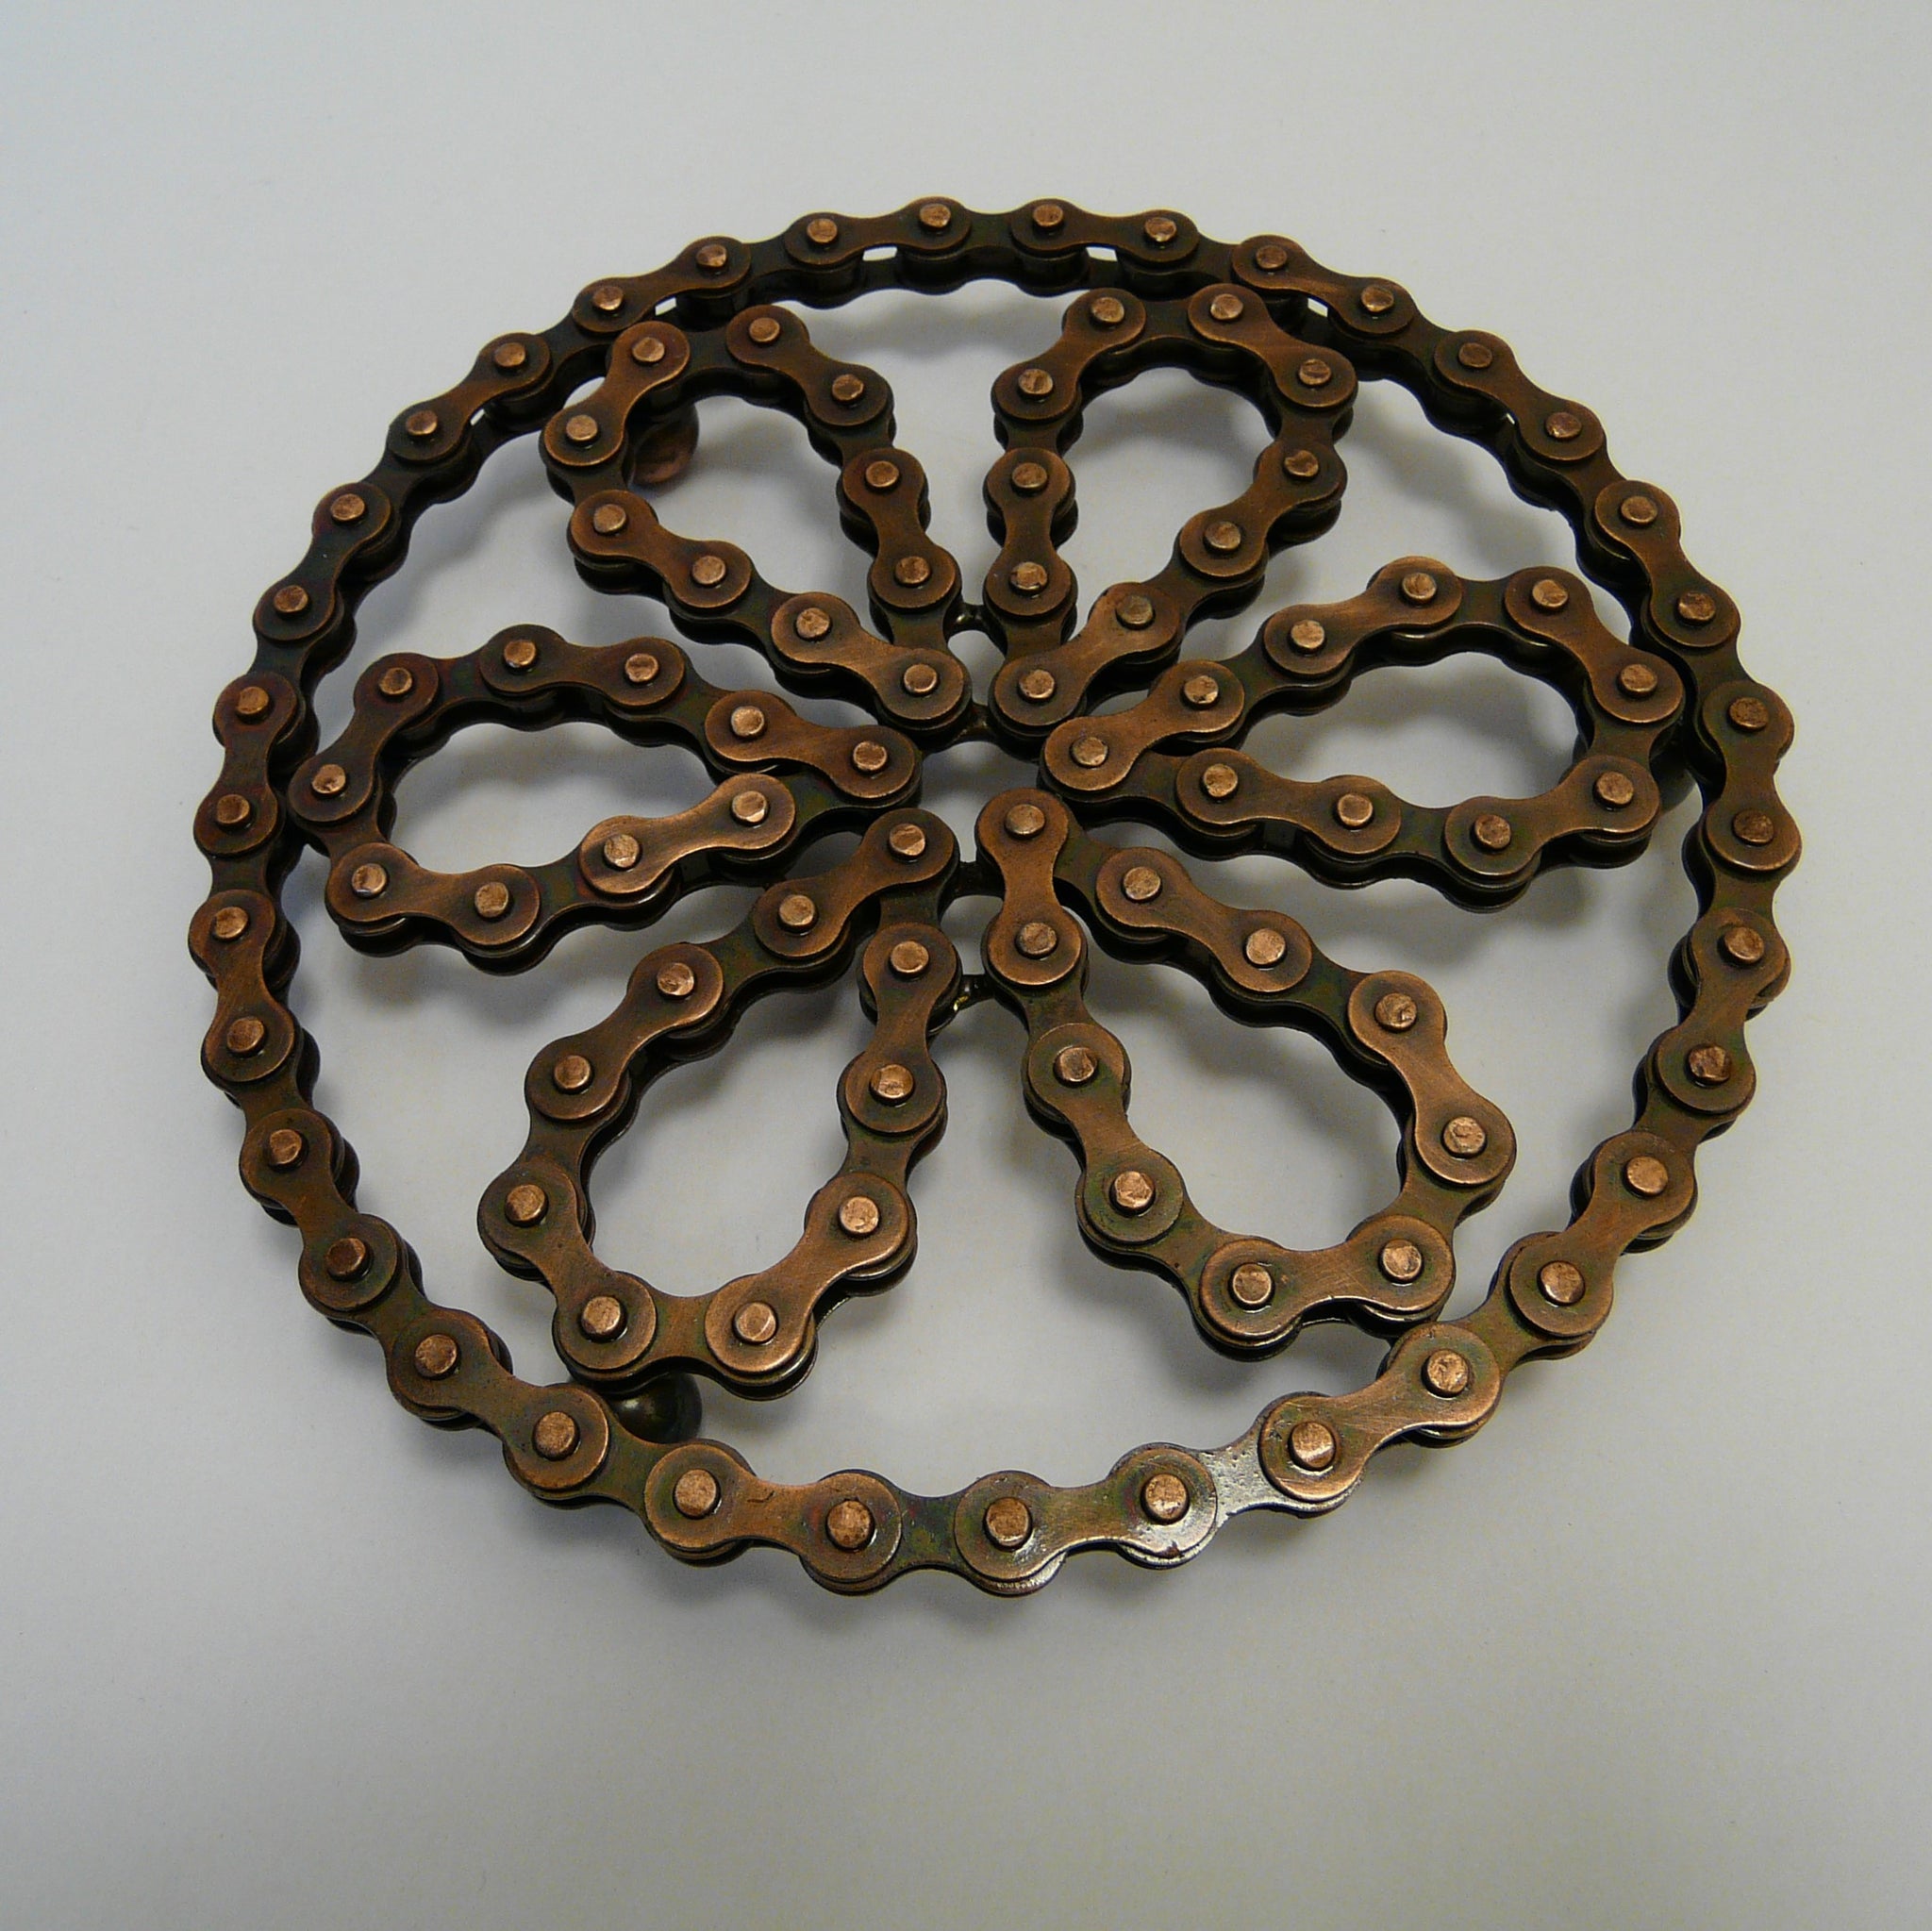 531-fair-trade-upcycled-bronze-brown-bike-bicycle-chain-trivet-flower-shape-cycle